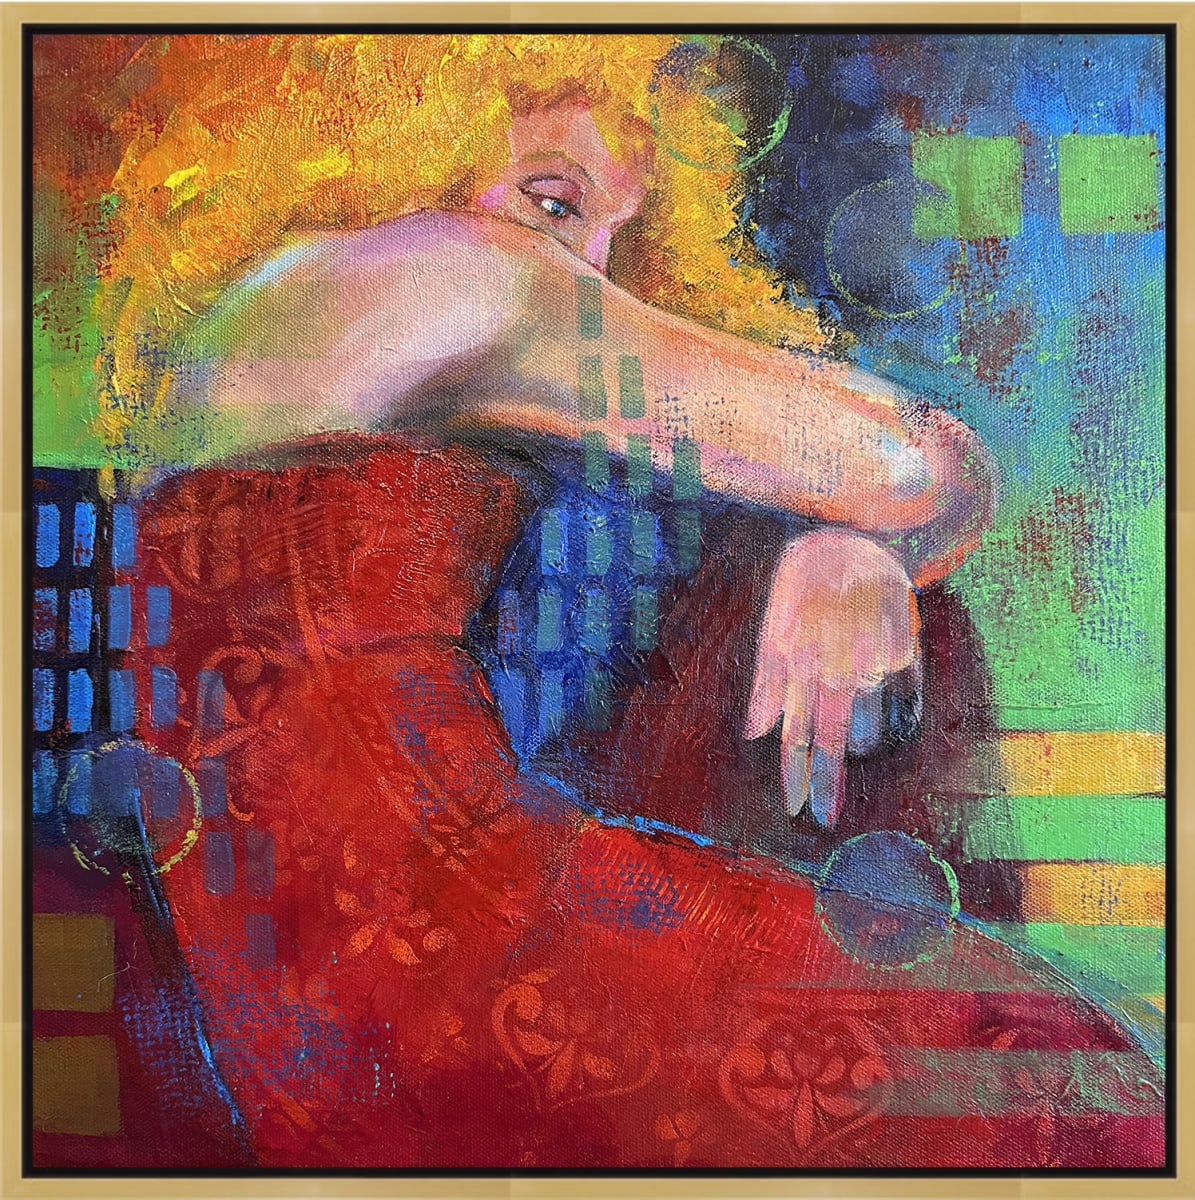 Lady in Red by Phyllis Mantik deQuevedo  Image: Lady in Red